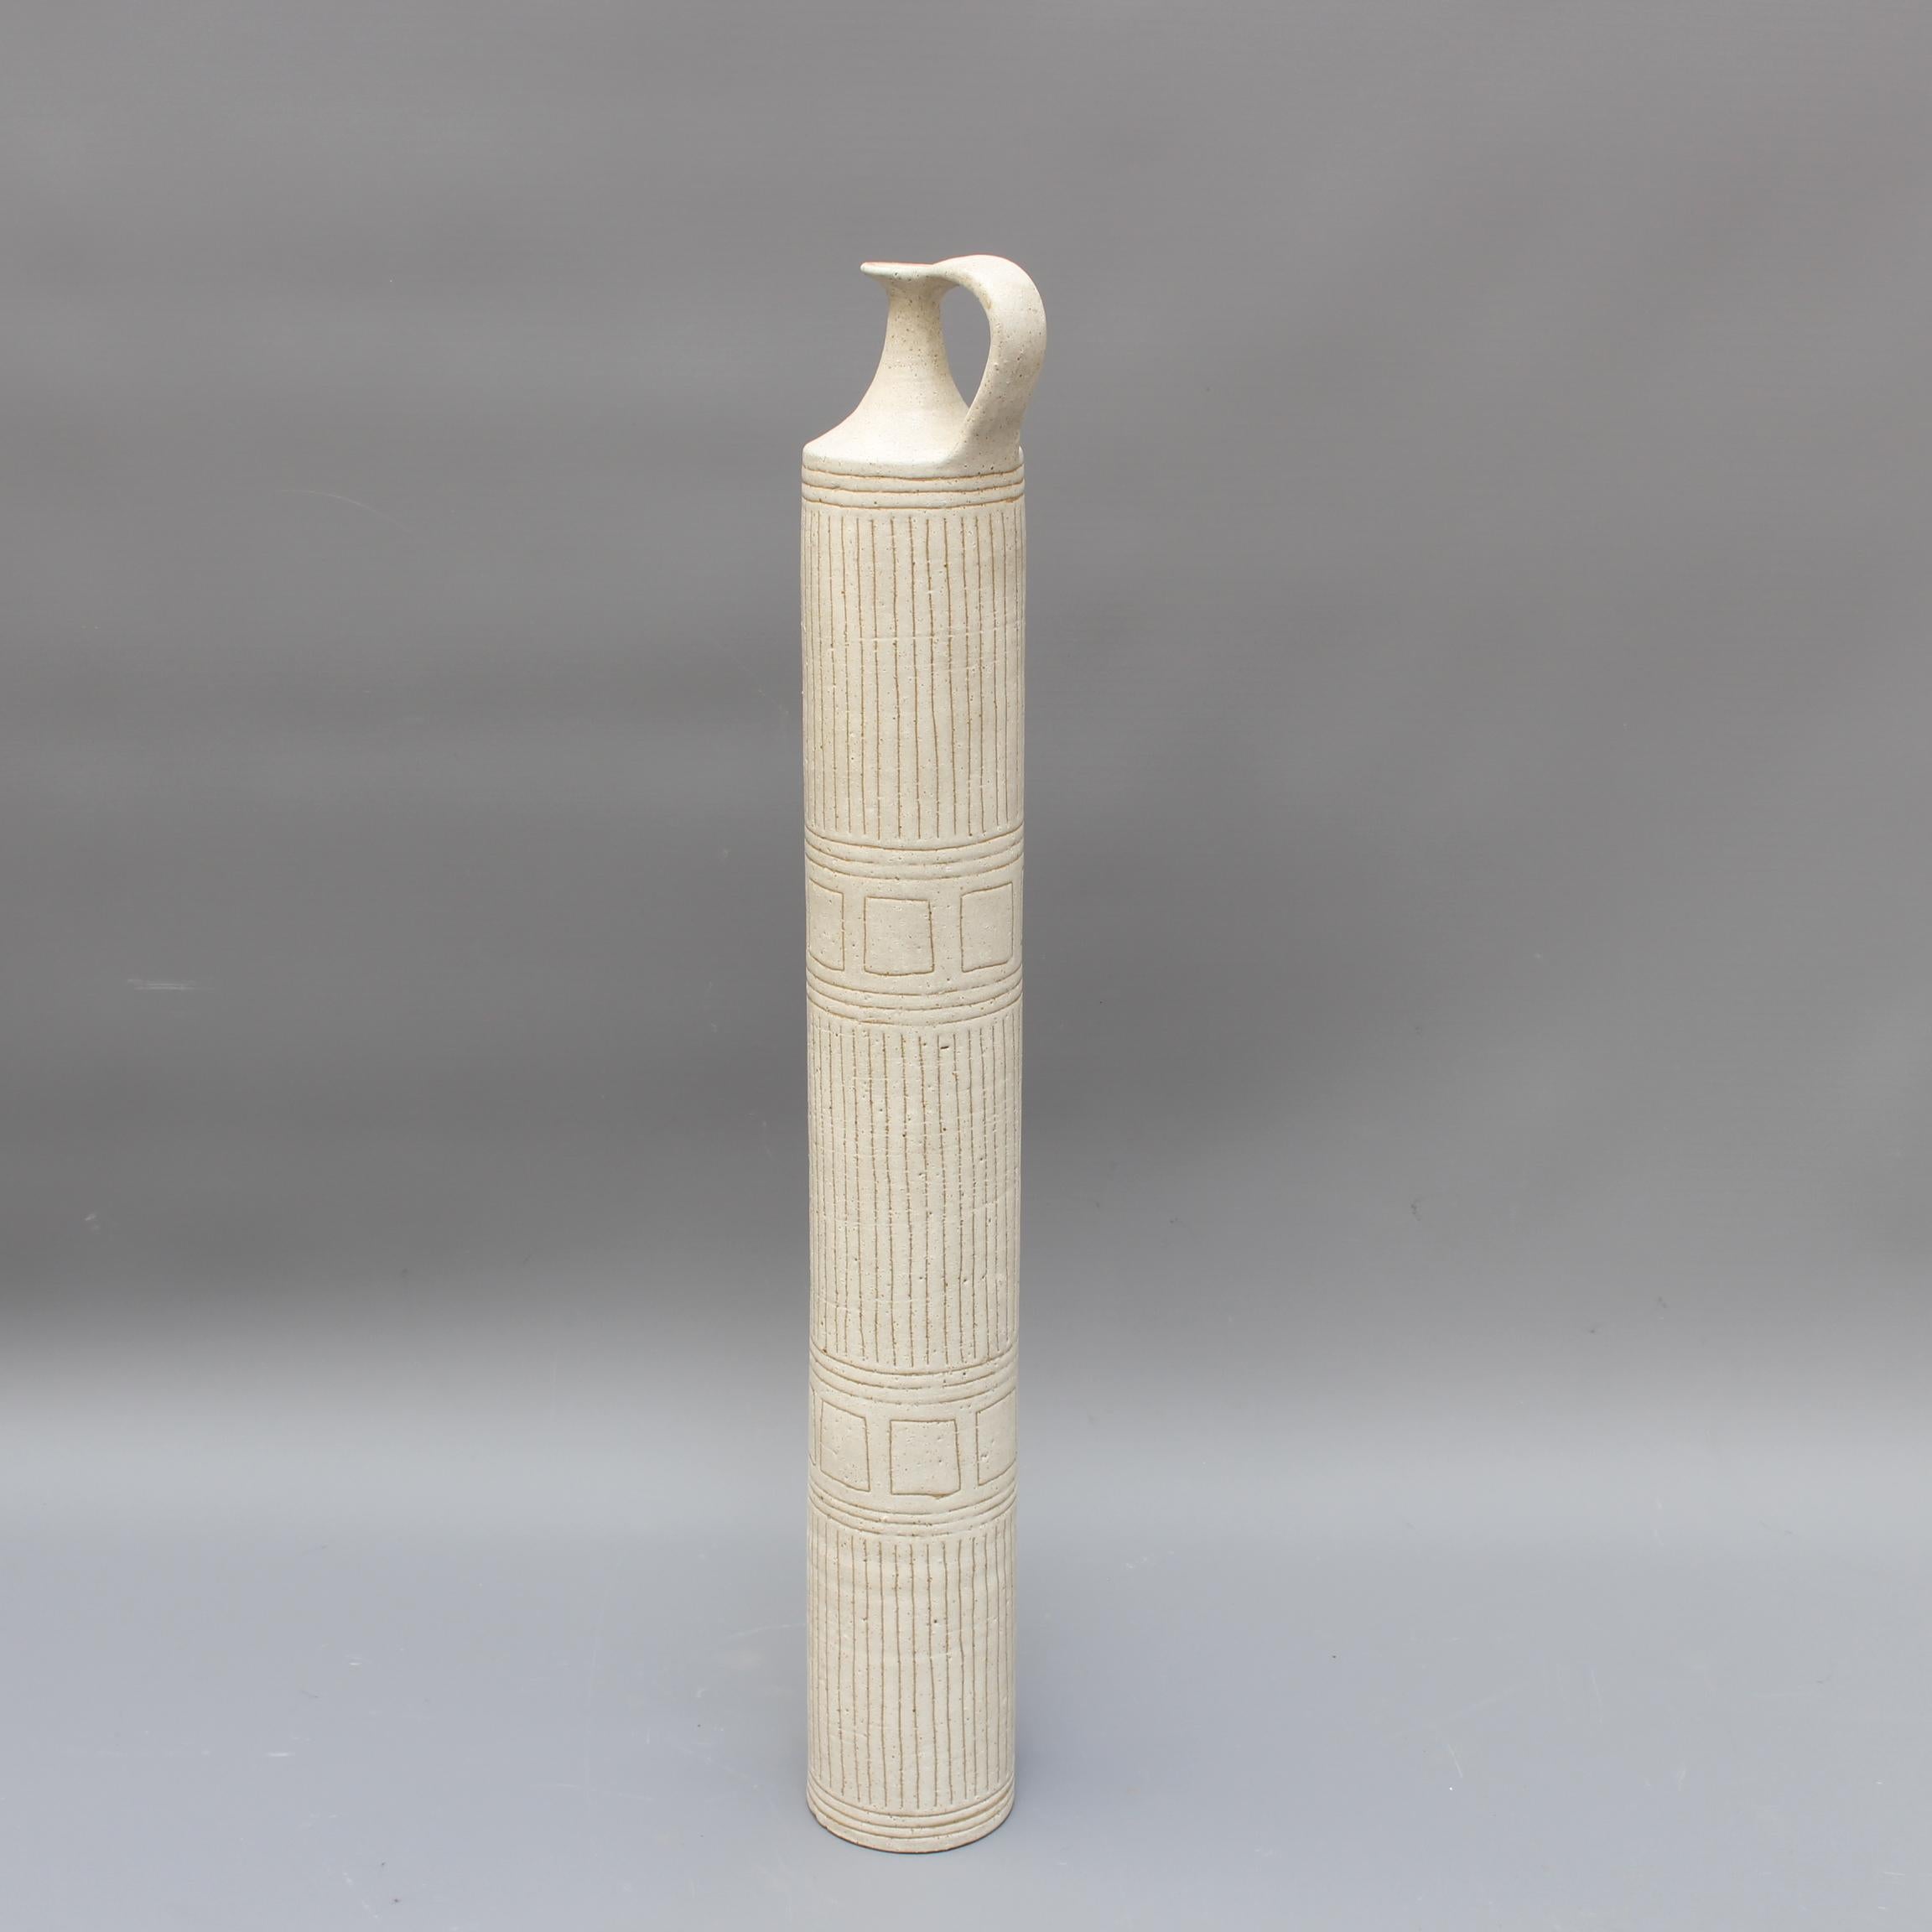 Stunningly tall cylindrical ceramic vase with single, amphora-style handle and Eastern motif on an elegant beige earthenware surface, by Bruno Gambone (circa 1970s). This substantial yet gracefully elongated decorative vase is a work of art whose